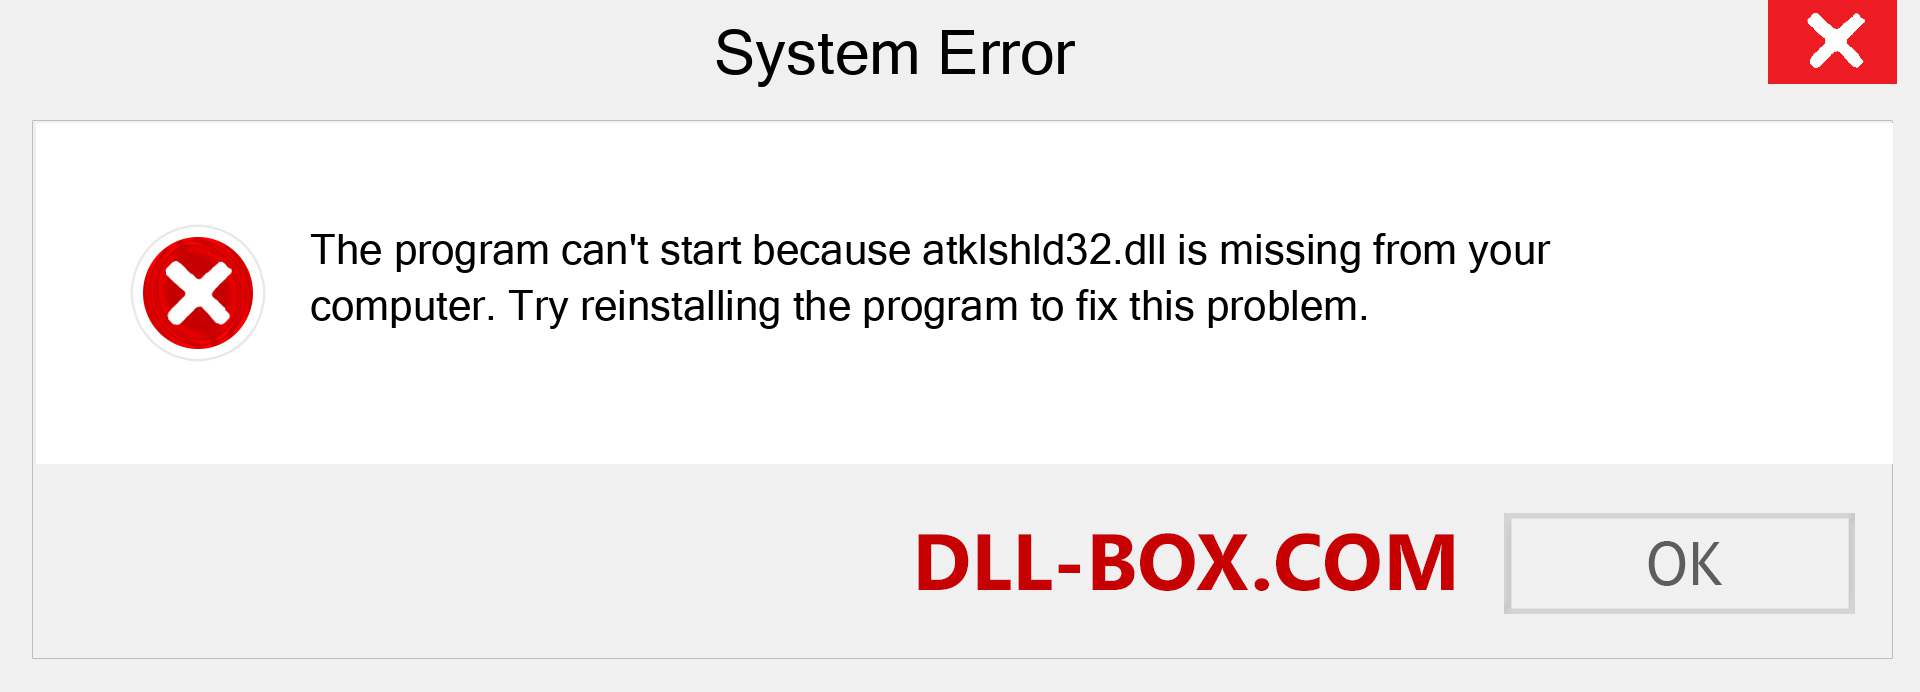  atklshld32.dll file is missing?. Download for Windows 7, 8, 10 - Fix  atklshld32 dll Missing Error on Windows, photos, images